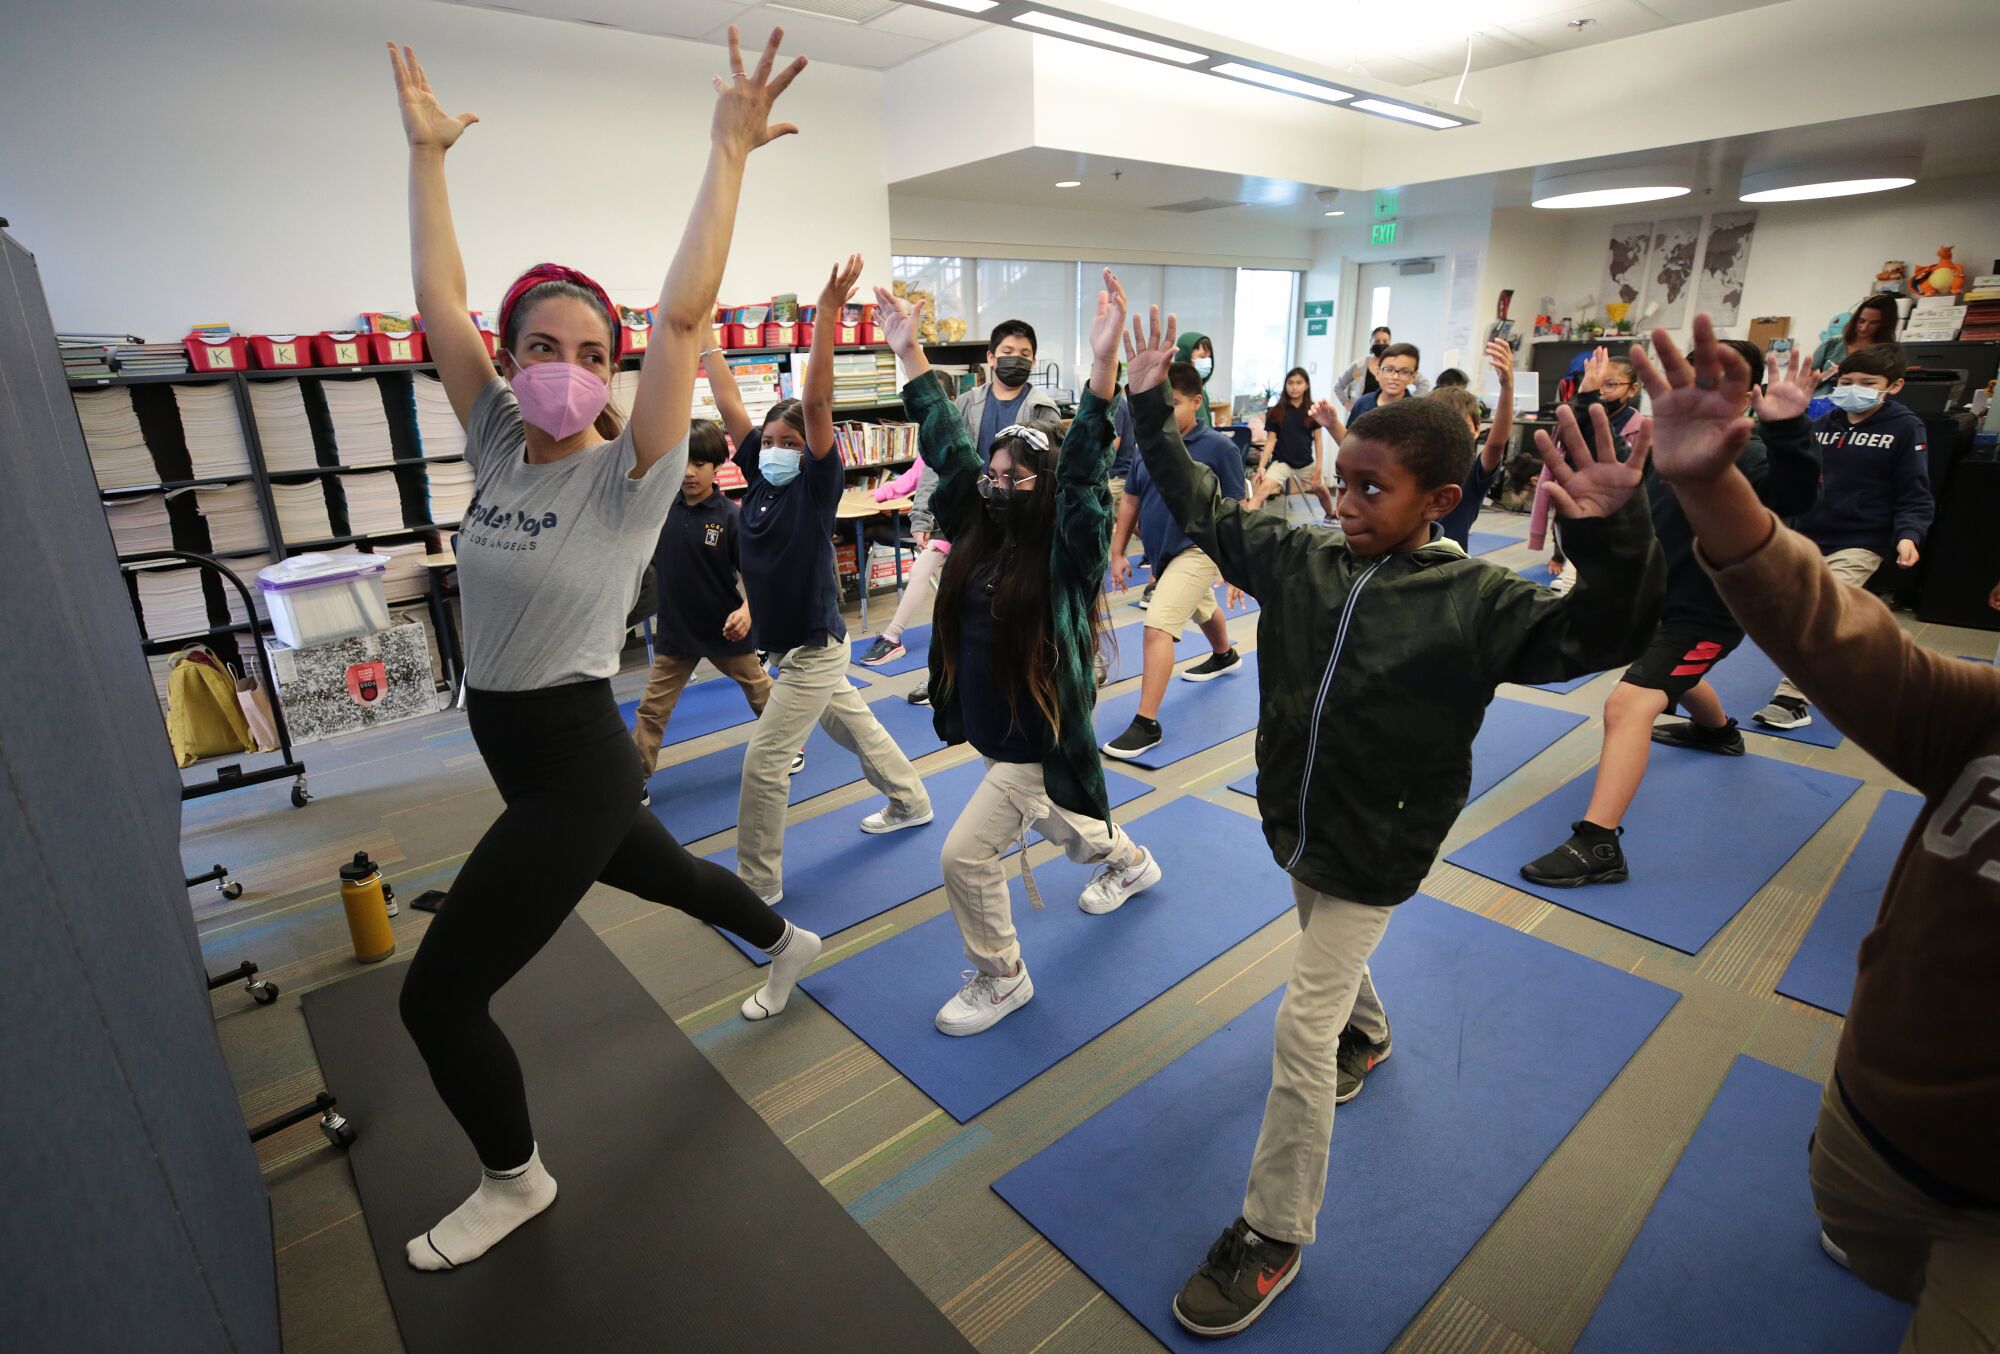 Lea-Rose Gallegos, co-founder of People Yoga, leads a class of fifth graders.